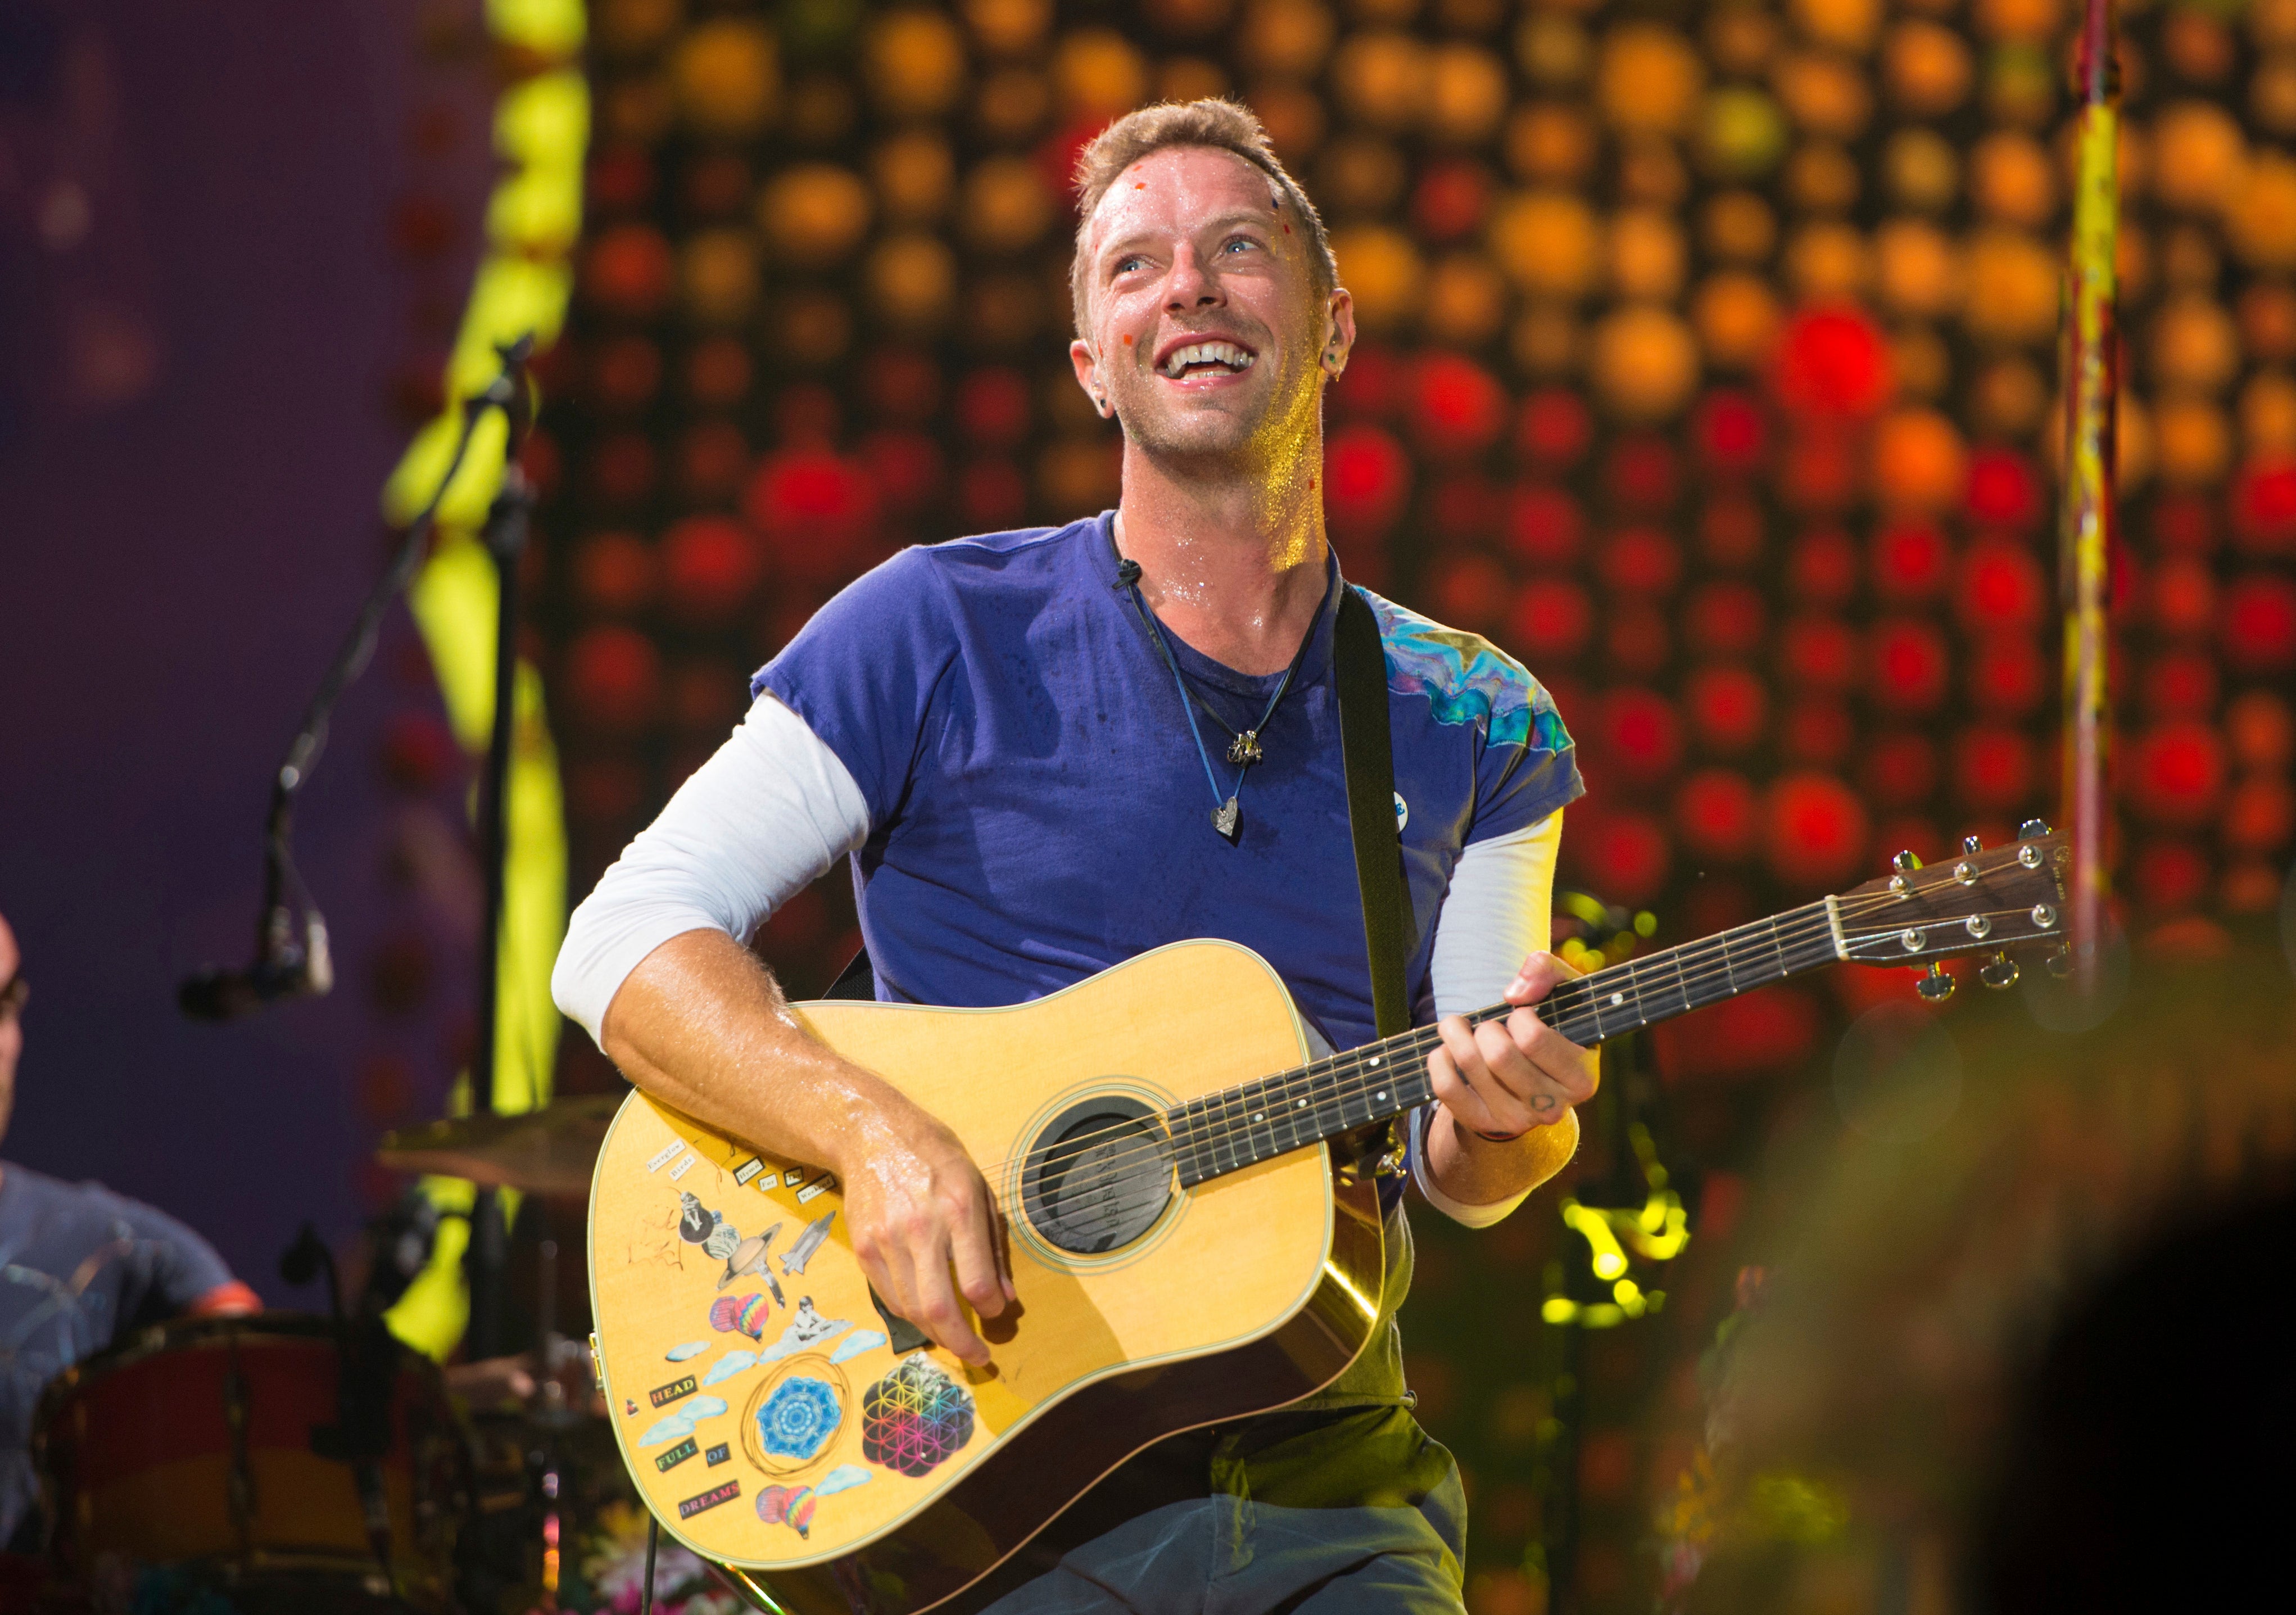 Coldplay Mixes Pop, Cosmic Musings on Uneven 'Music of the Spheres